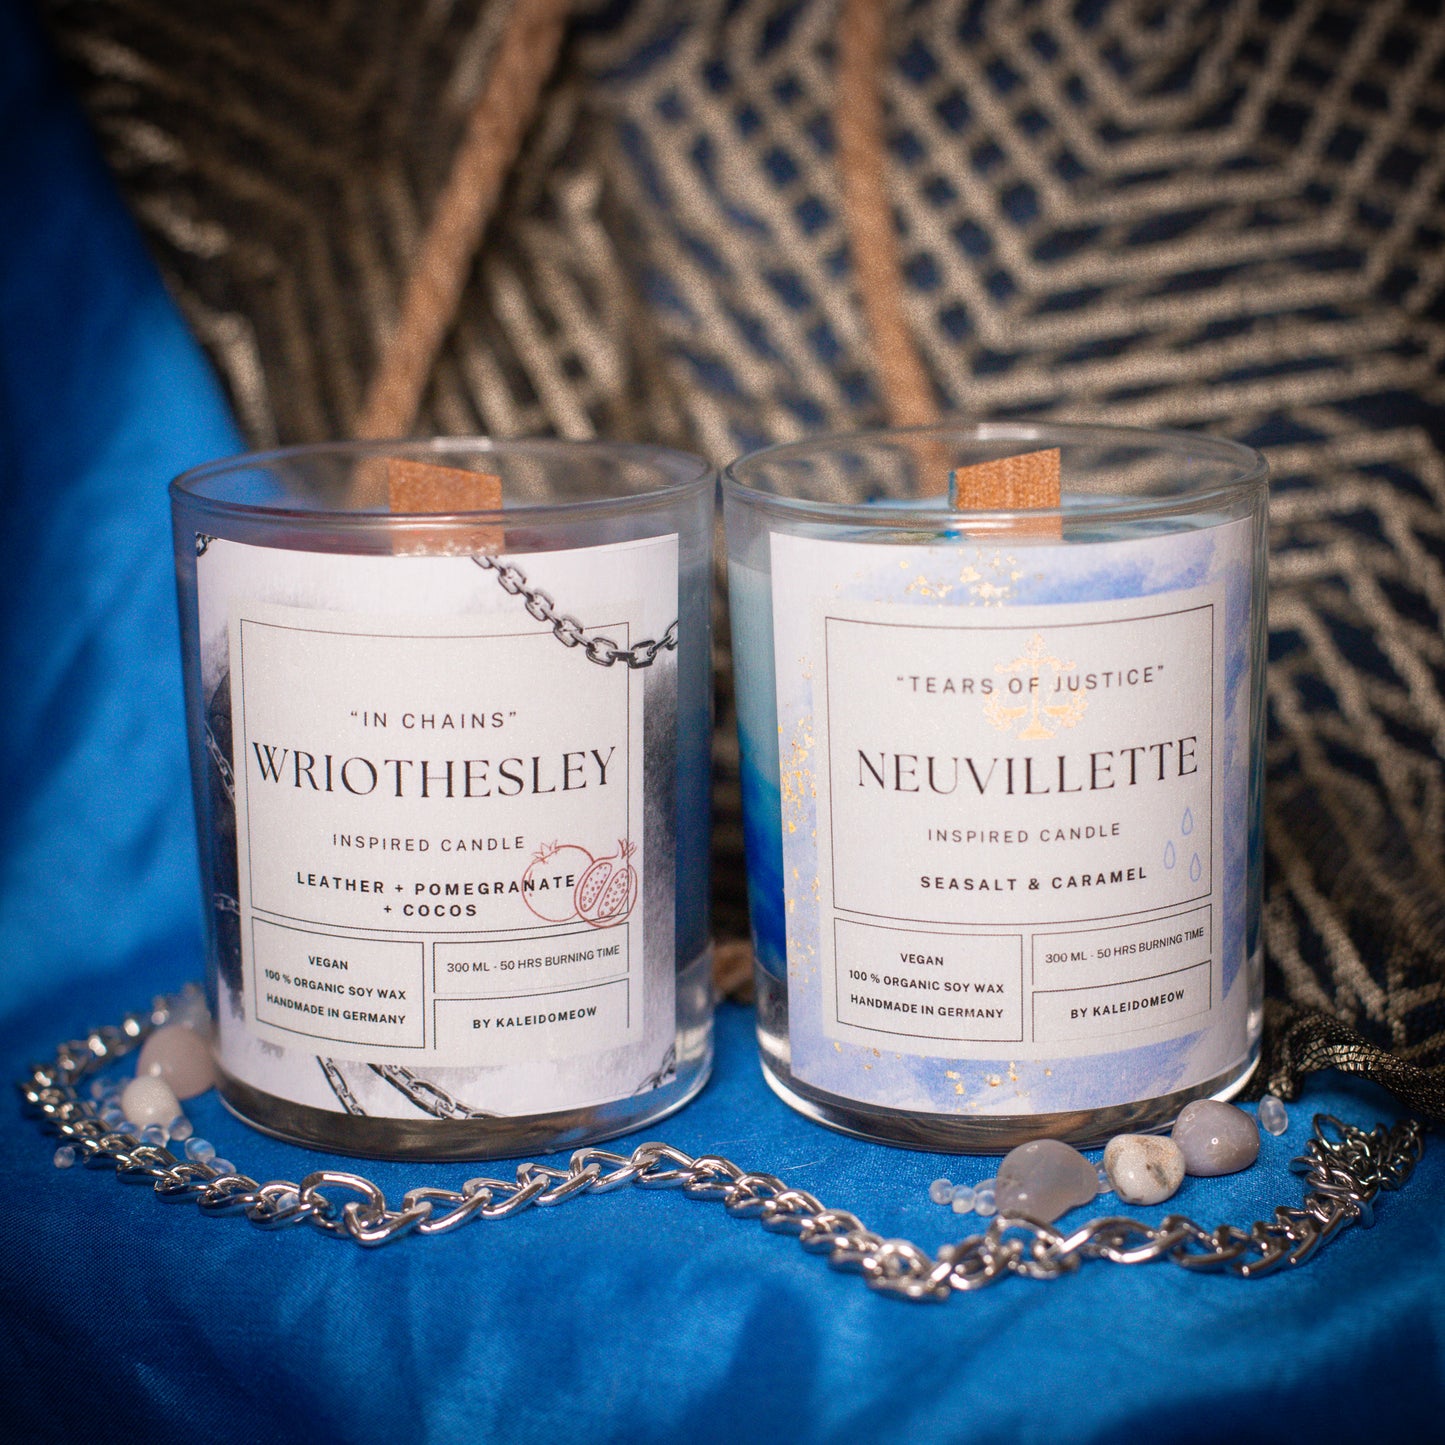 Wriothesley inspired candle - 'In Chains' Genshin inspired scented candle 100 ML